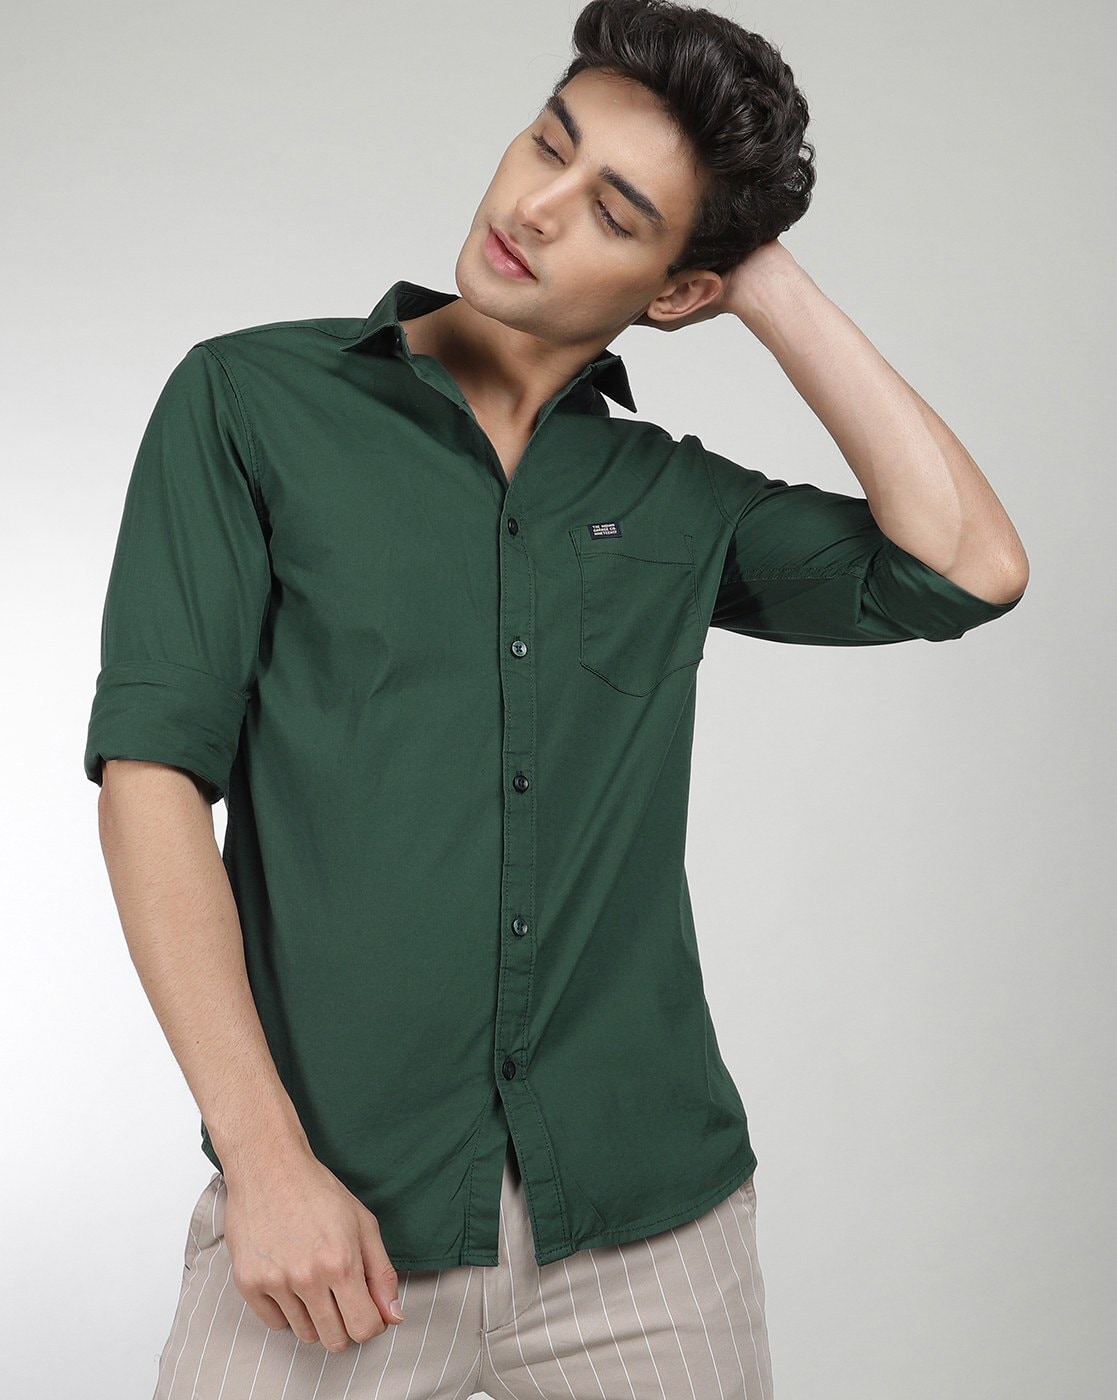 Green Pants Outfits For Men 283 ideas  outfits  Lookastic